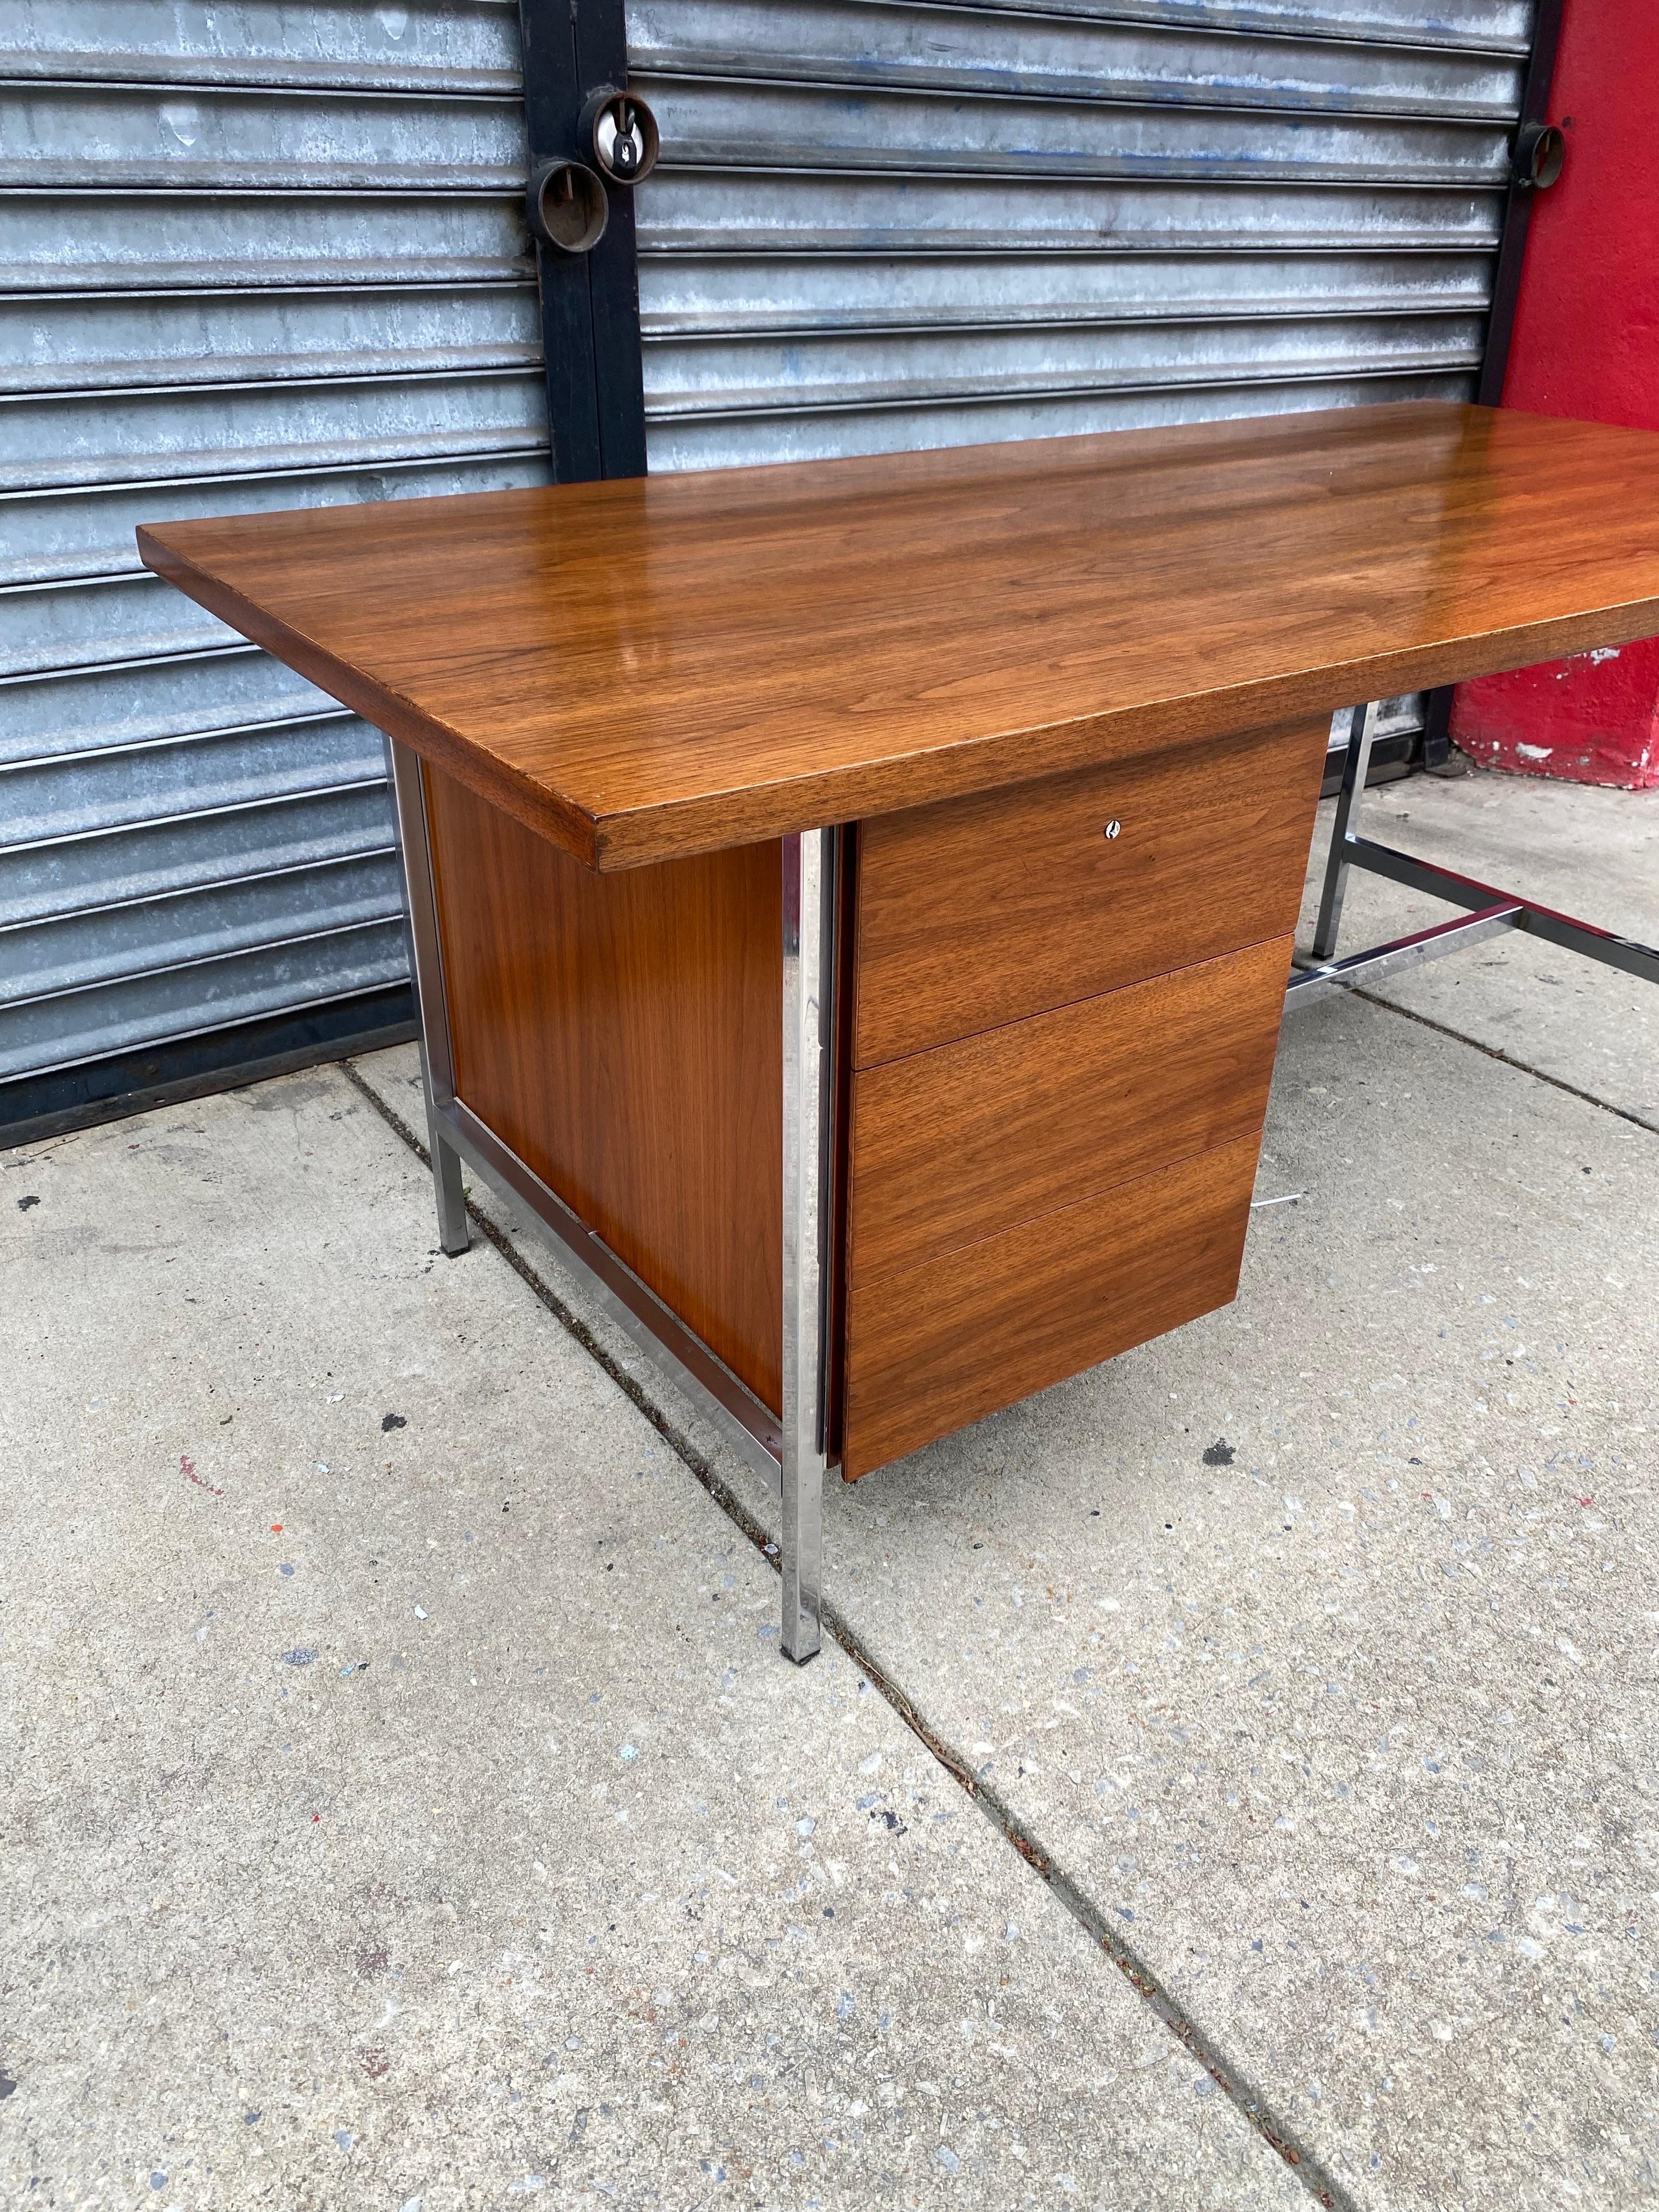 Florence knoll walnut desk with square tube frame. Newly refinished and ready to go! Ample work surface to really get something done! Three pull out drawers for storage. Really nice Walnut grain, finished front and back!